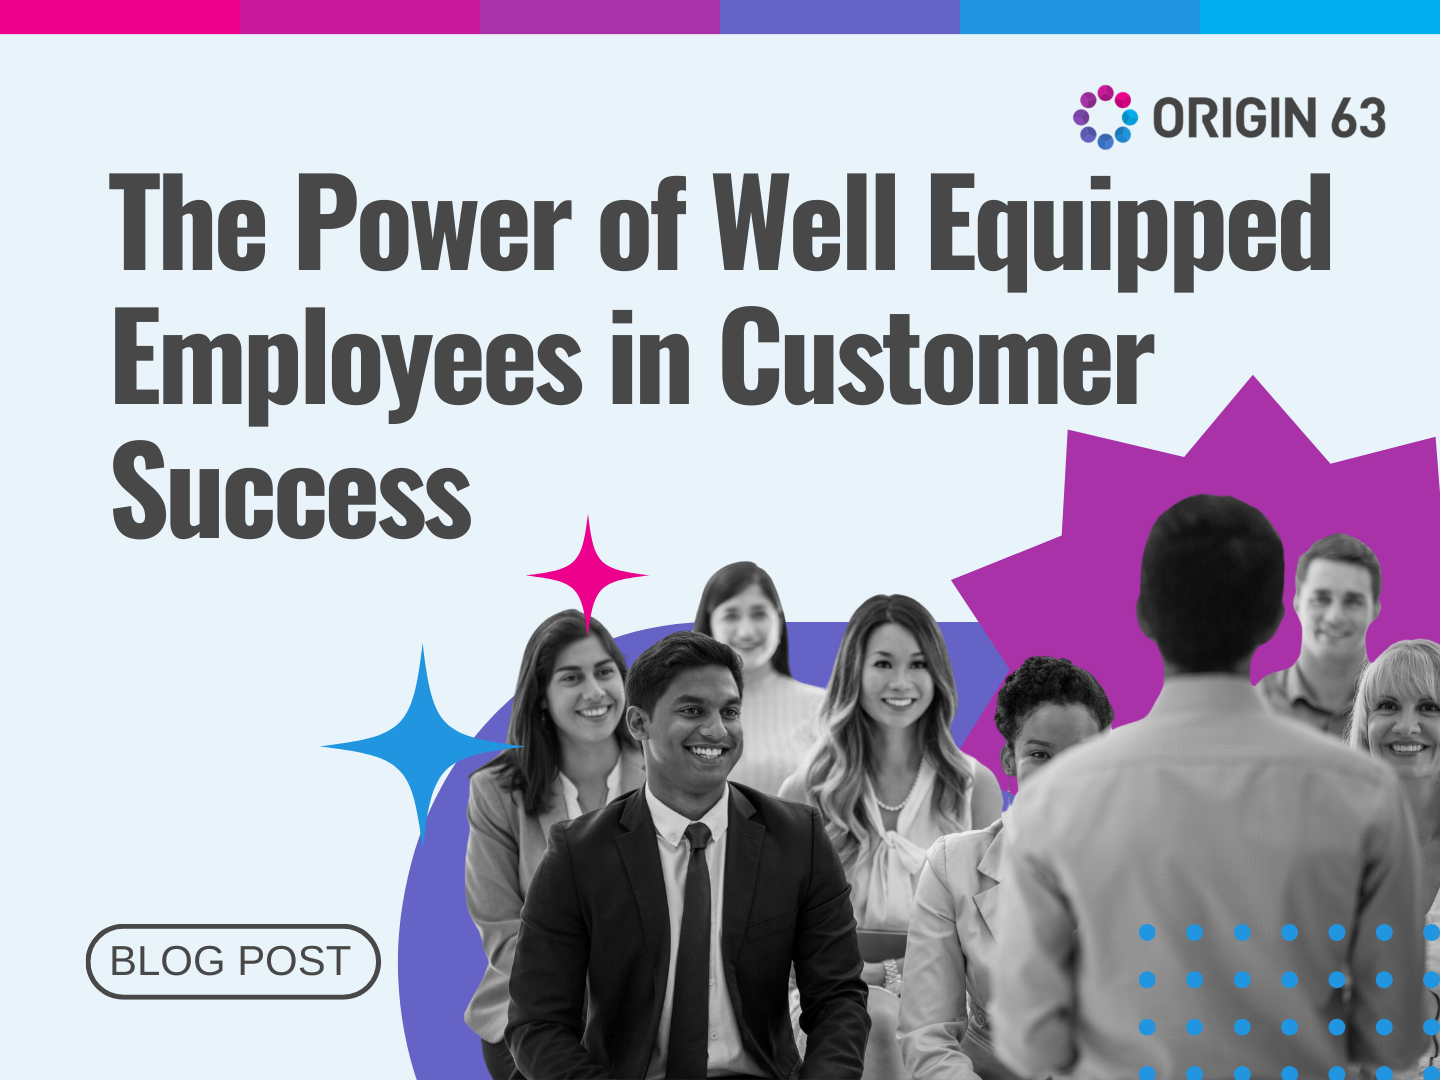 Learn how investing in employee satisfaction translates to better customer experiences and higher retention.